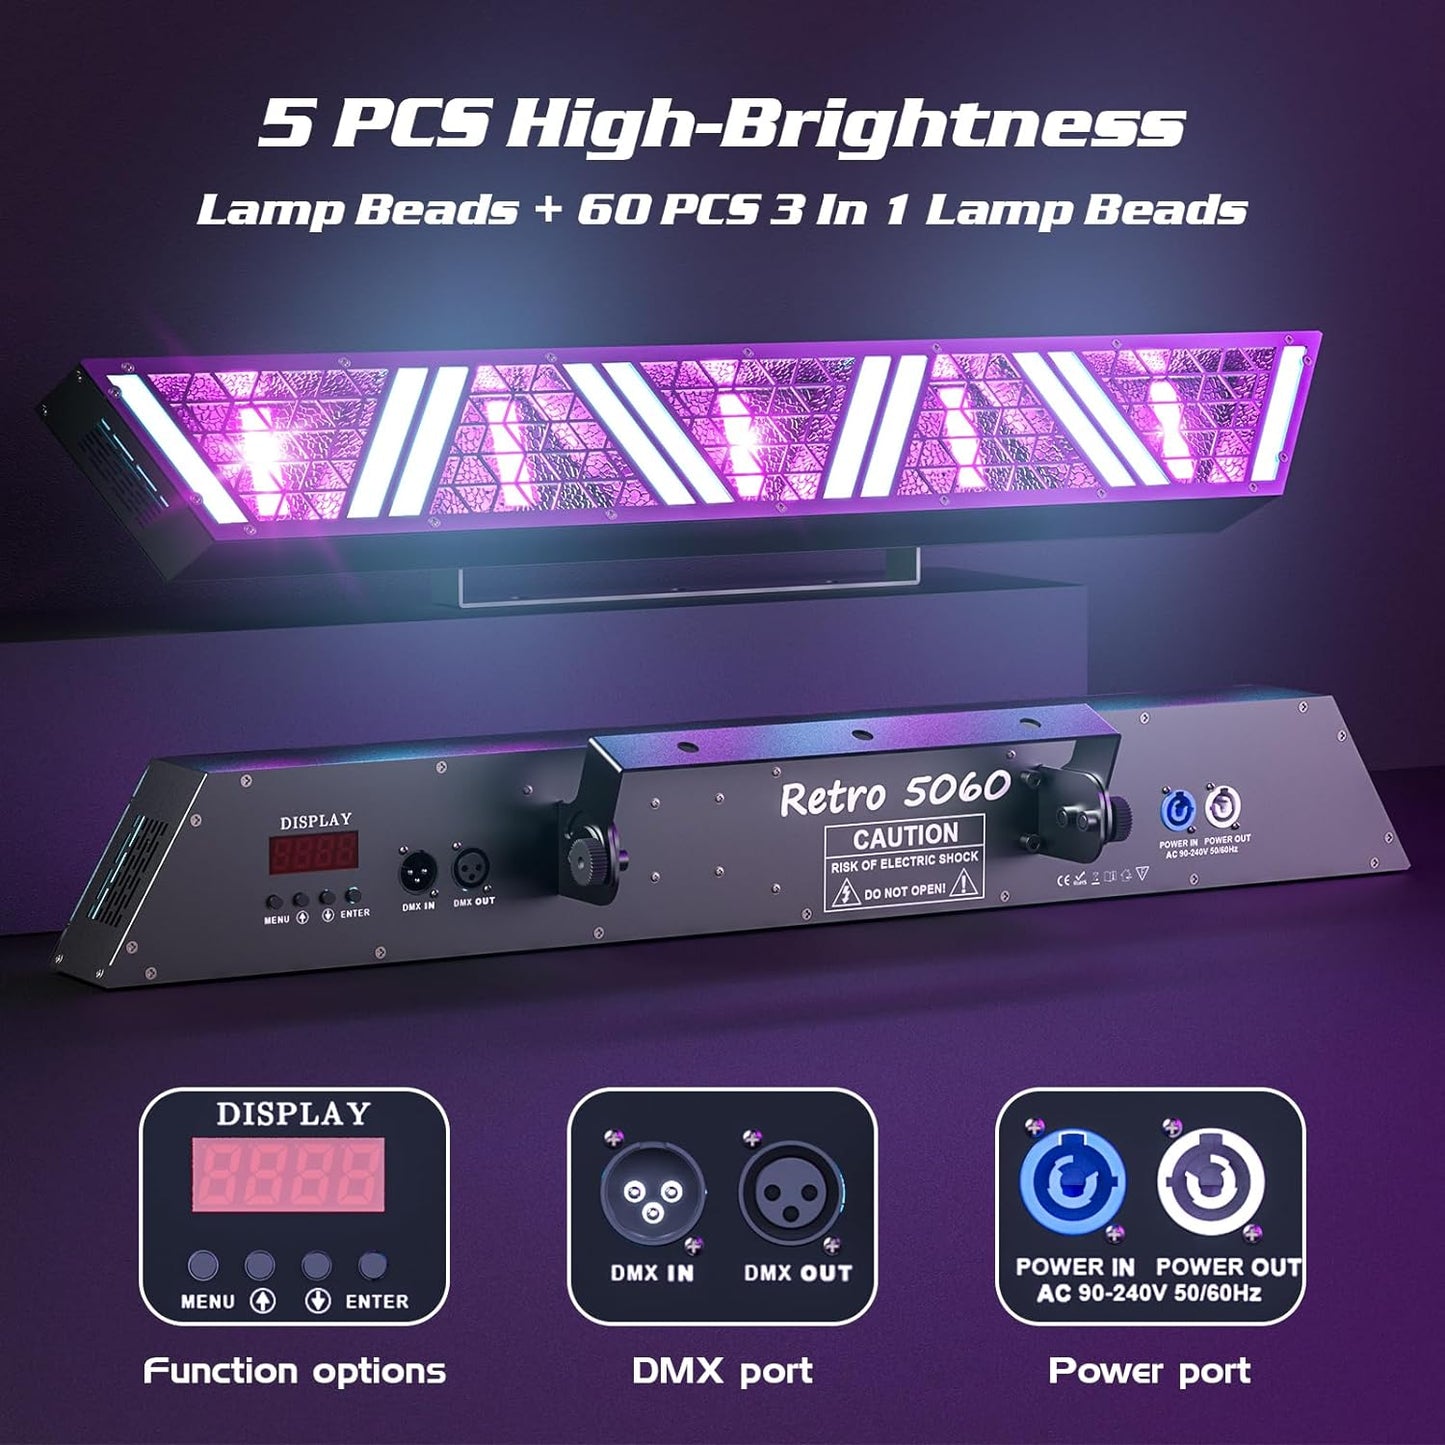 FODEXAZY 150W Led Stage Wash Light Bar, 5 PCS high-brightness lamp beads + 3 in 1 Led lamp beads Par Lights,Sound Activated with 12/42 Channels DMX DJ Lights for Event Christmas Party Dan